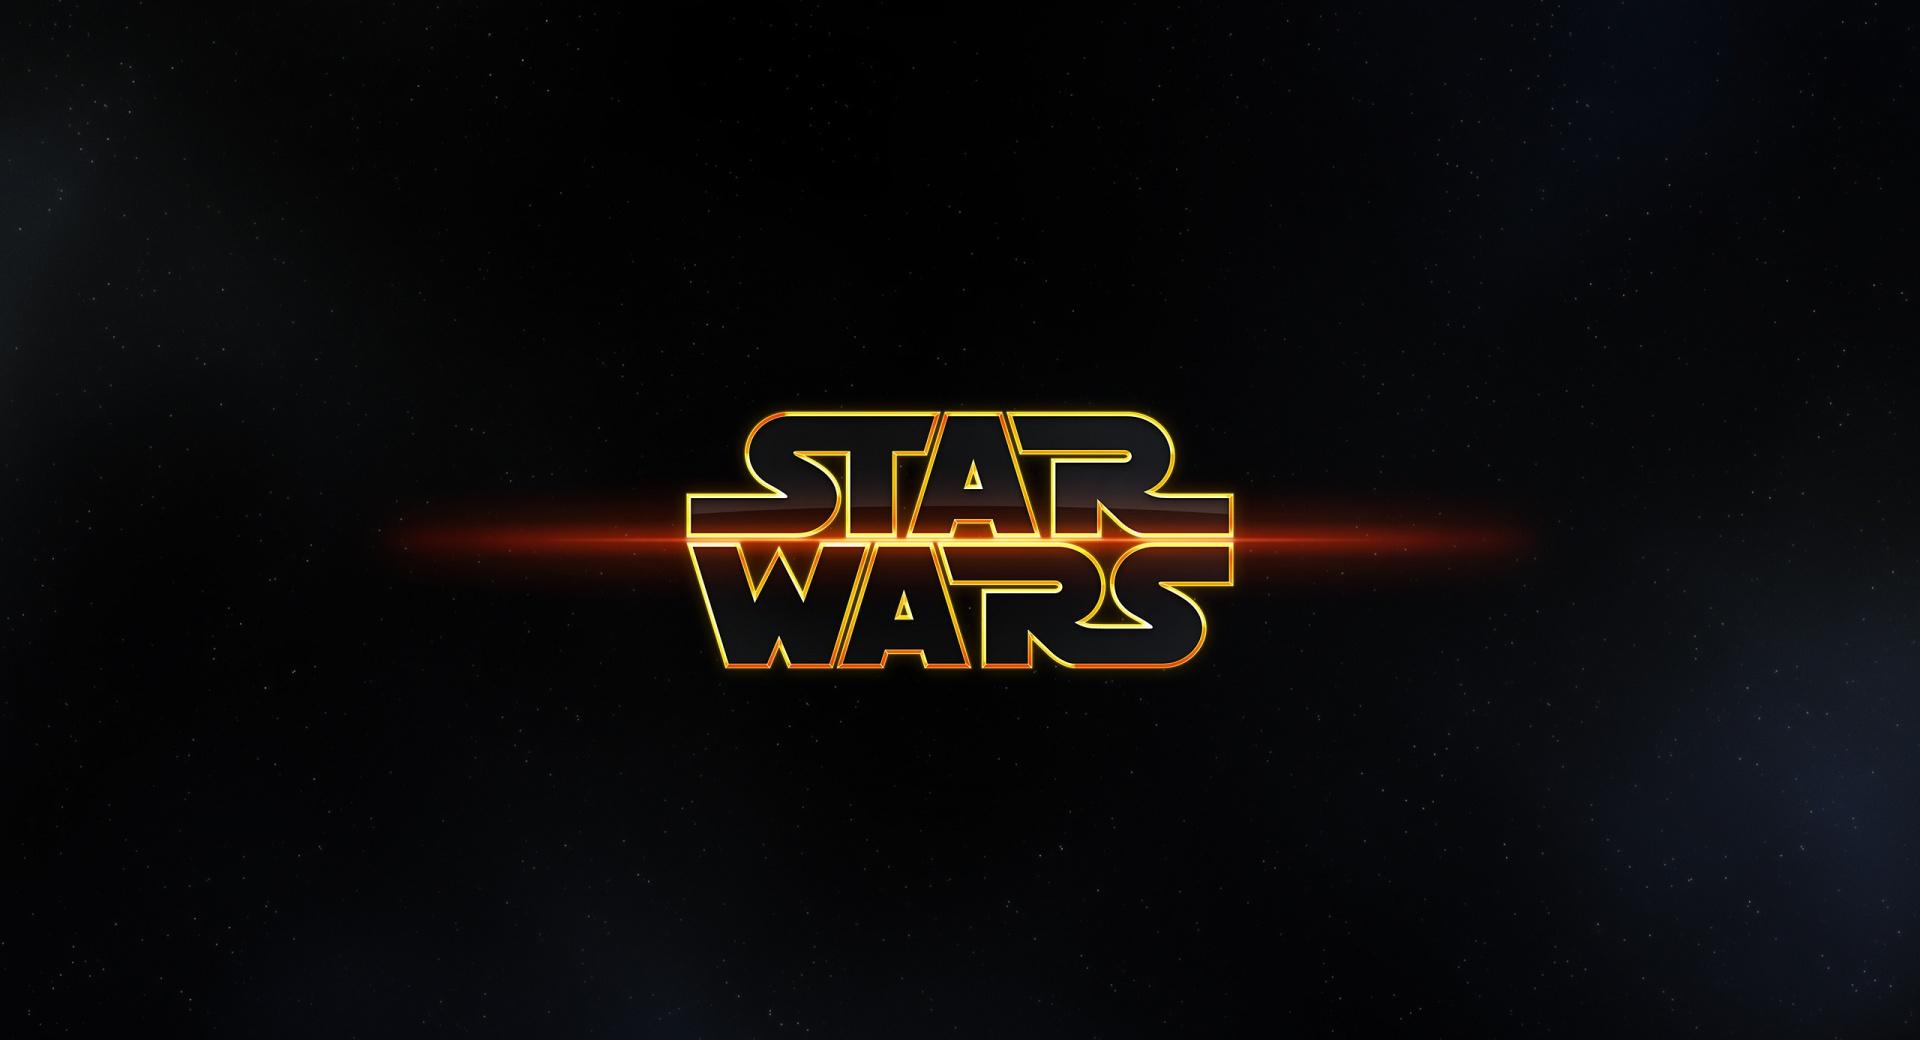 Star Wars By LouieMantia wallpapers HD quality